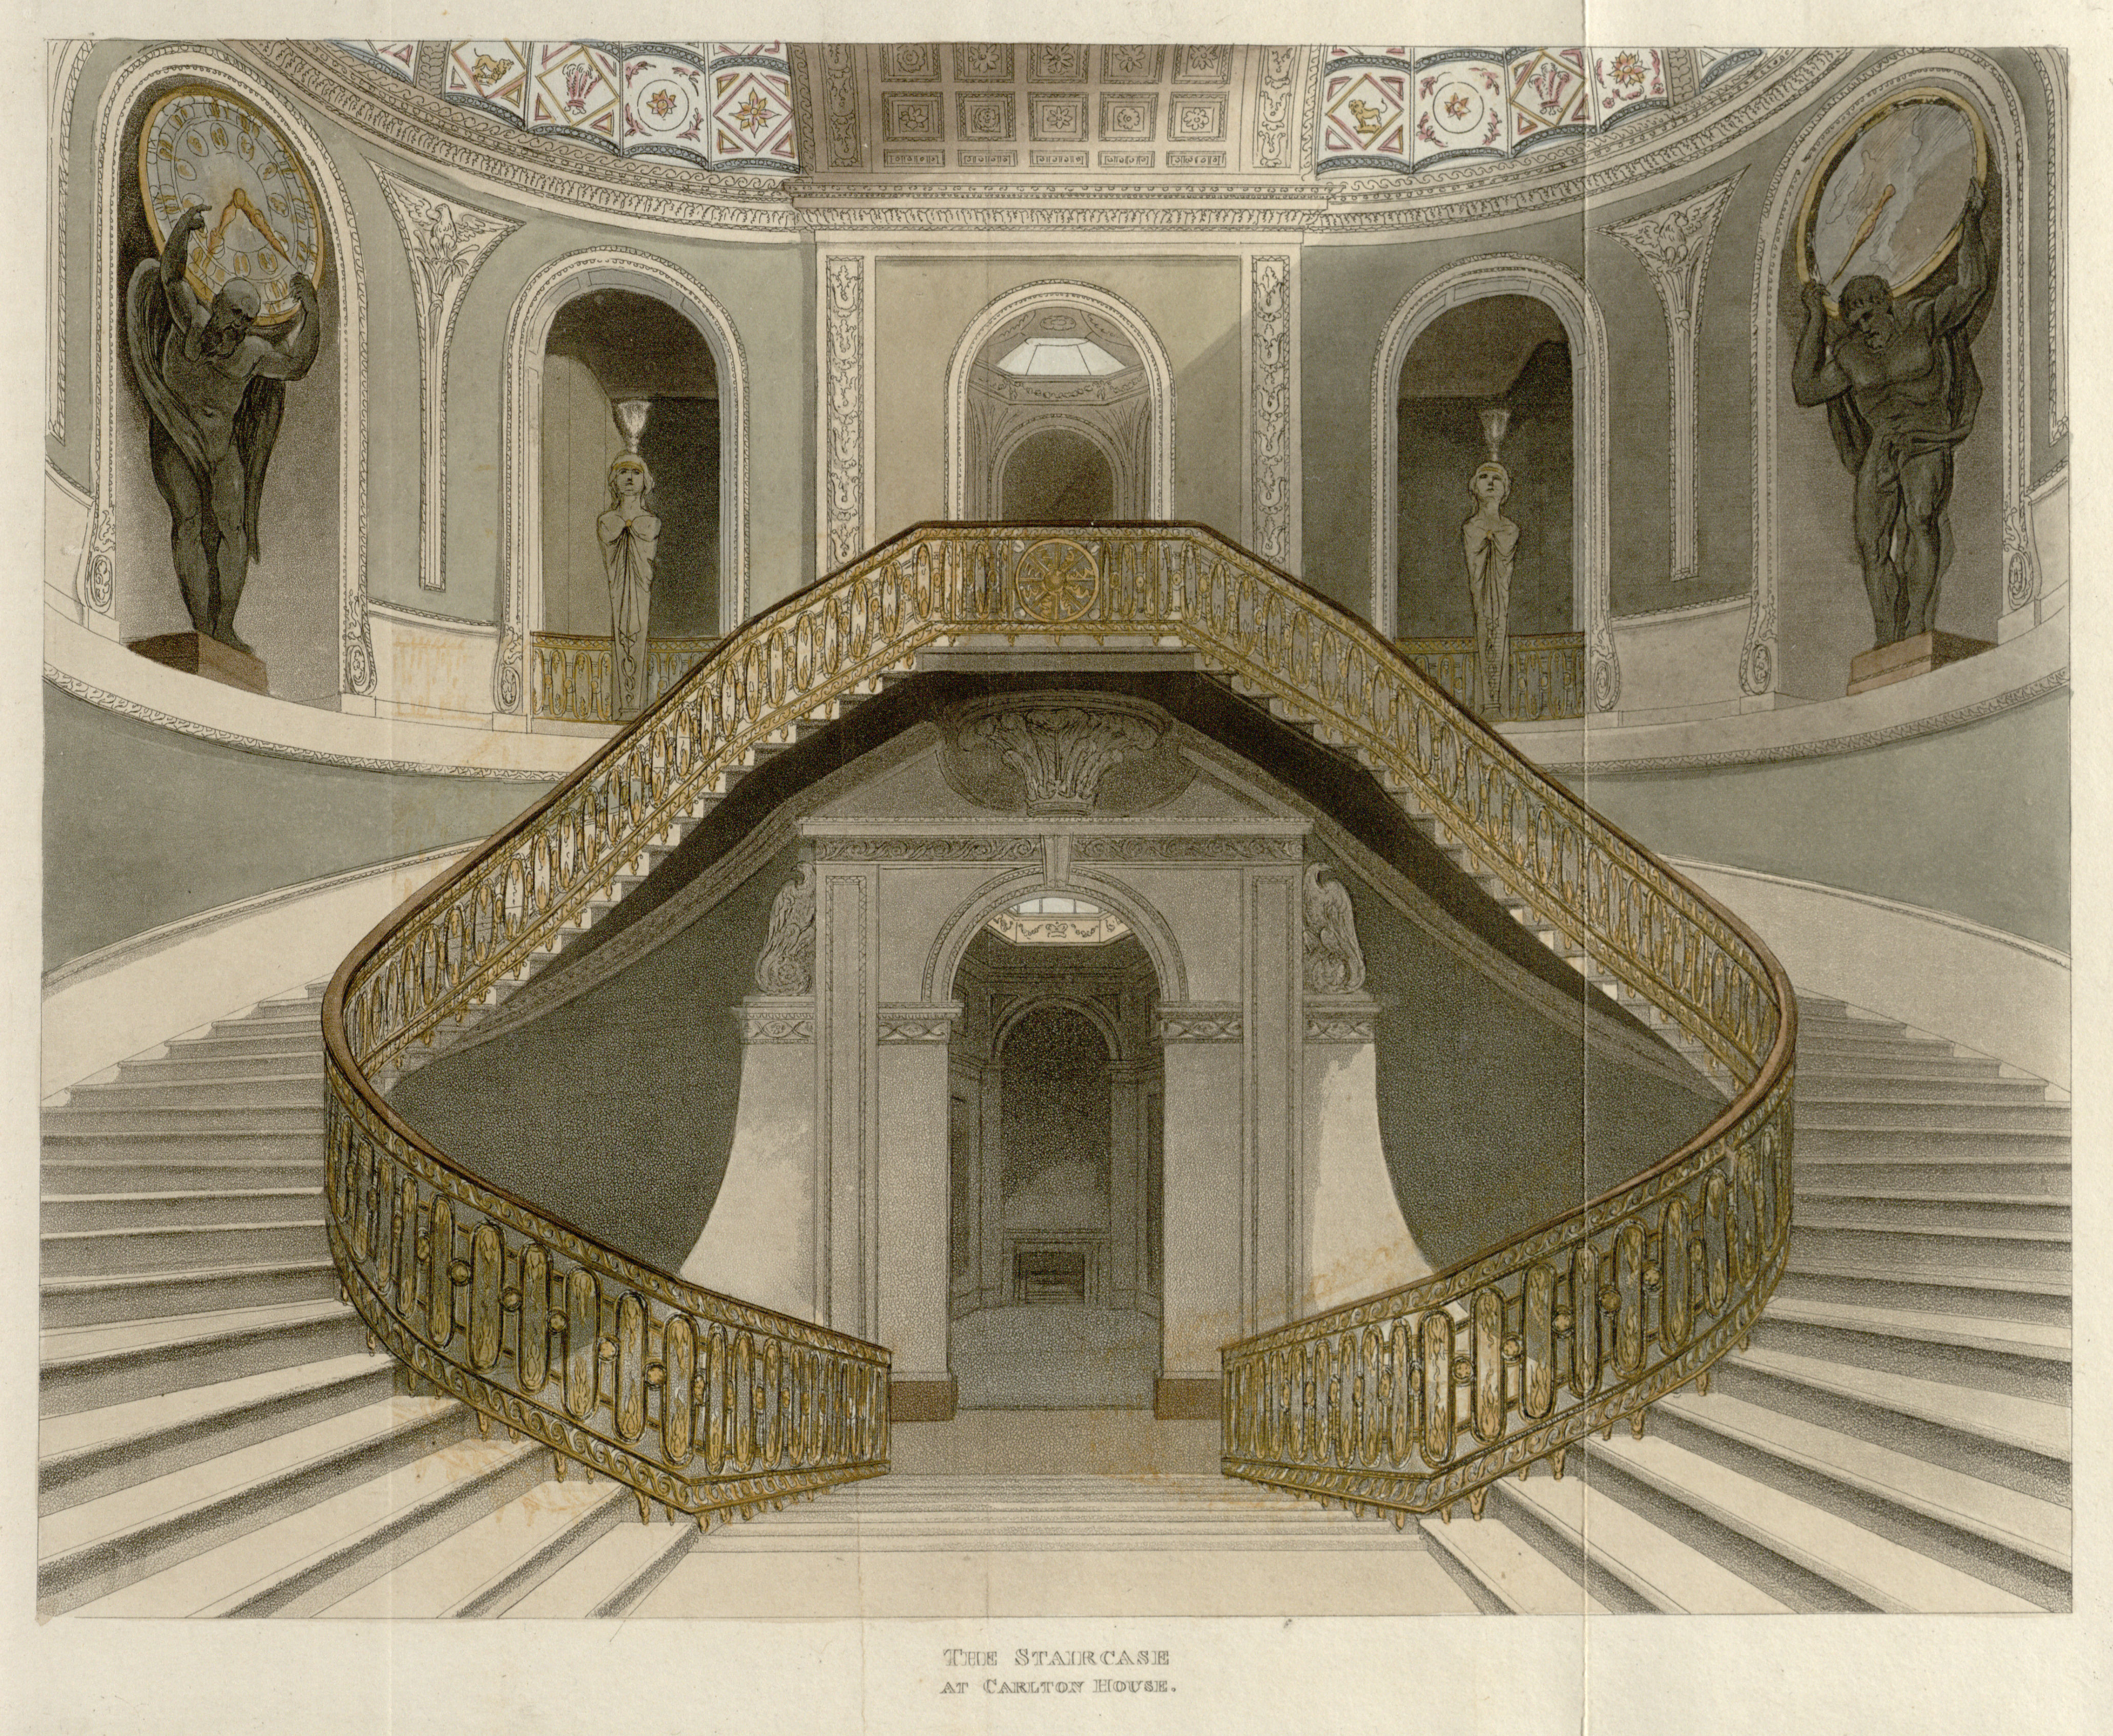 04 - Papworth - The Staircase at Carlton House